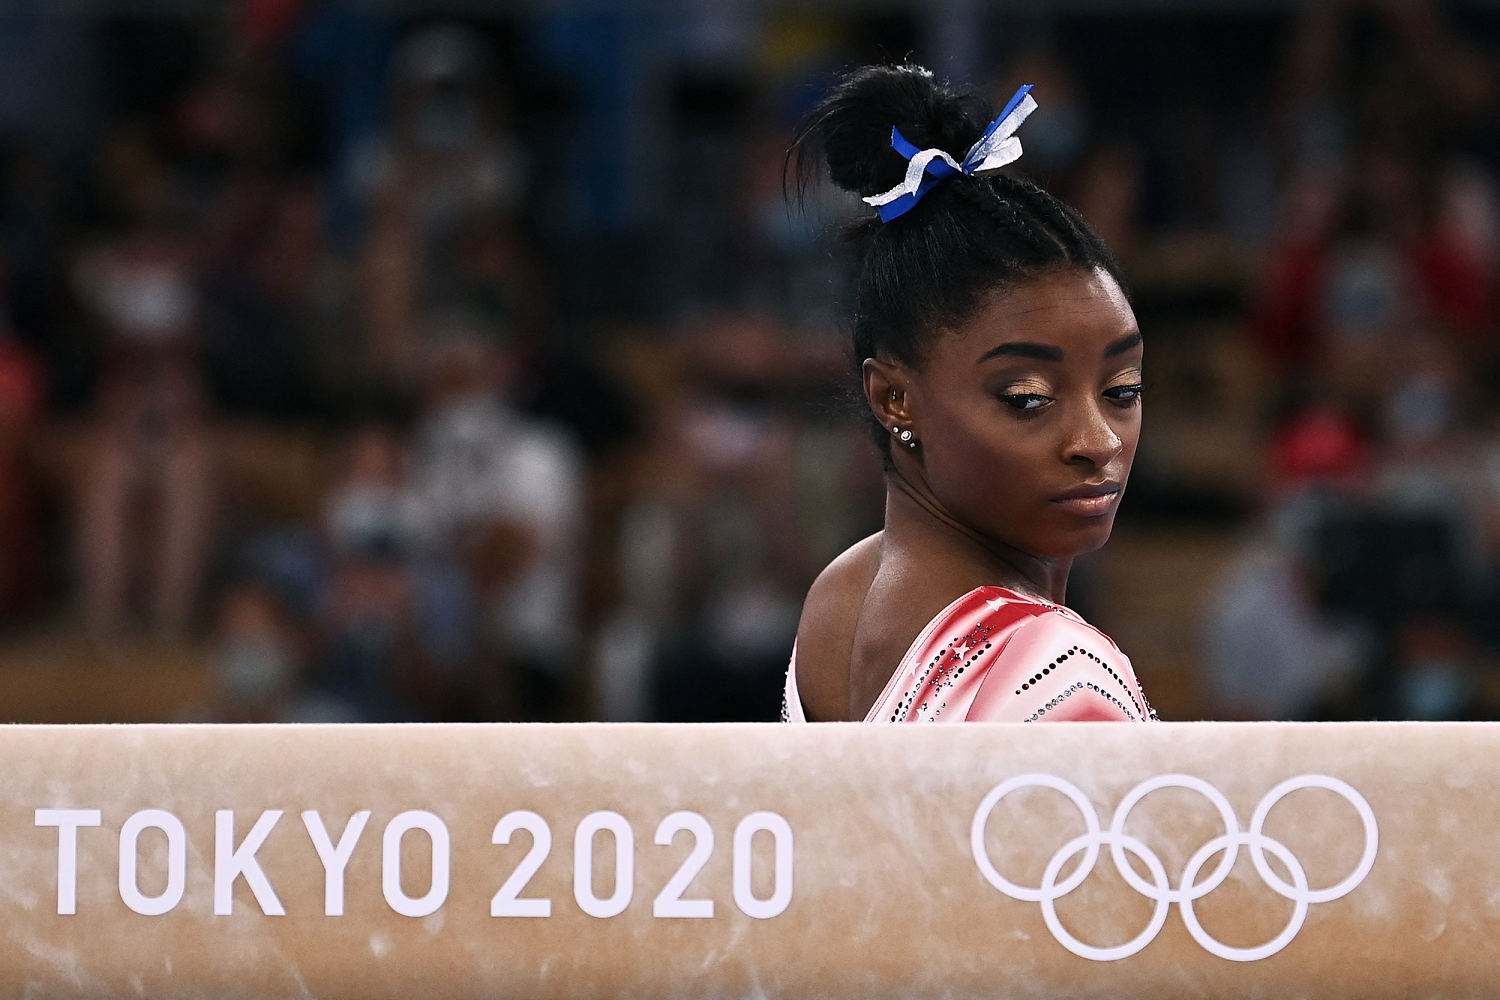 Simone Biles on Olympics twisties: 'I thought I was going to be banned from America'